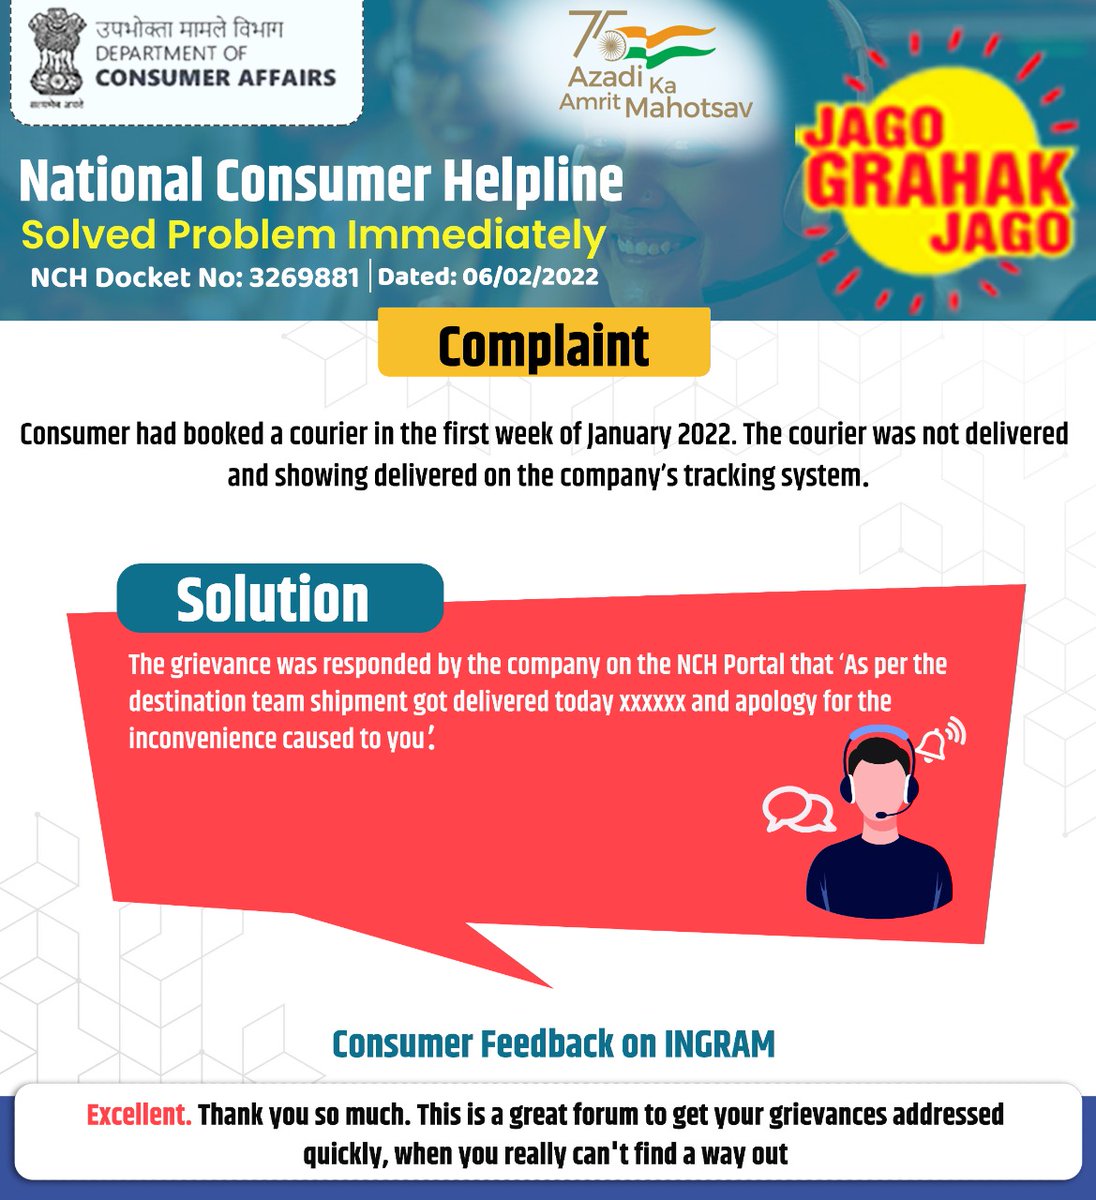 A success story of National Consumer Helpline (NCH). NCH helped a consumer in getting redressal of his grievance related to shipment of a courier. #JagoGrahakJago #Success #story #NCH #AzadiKaAmritMahotsav